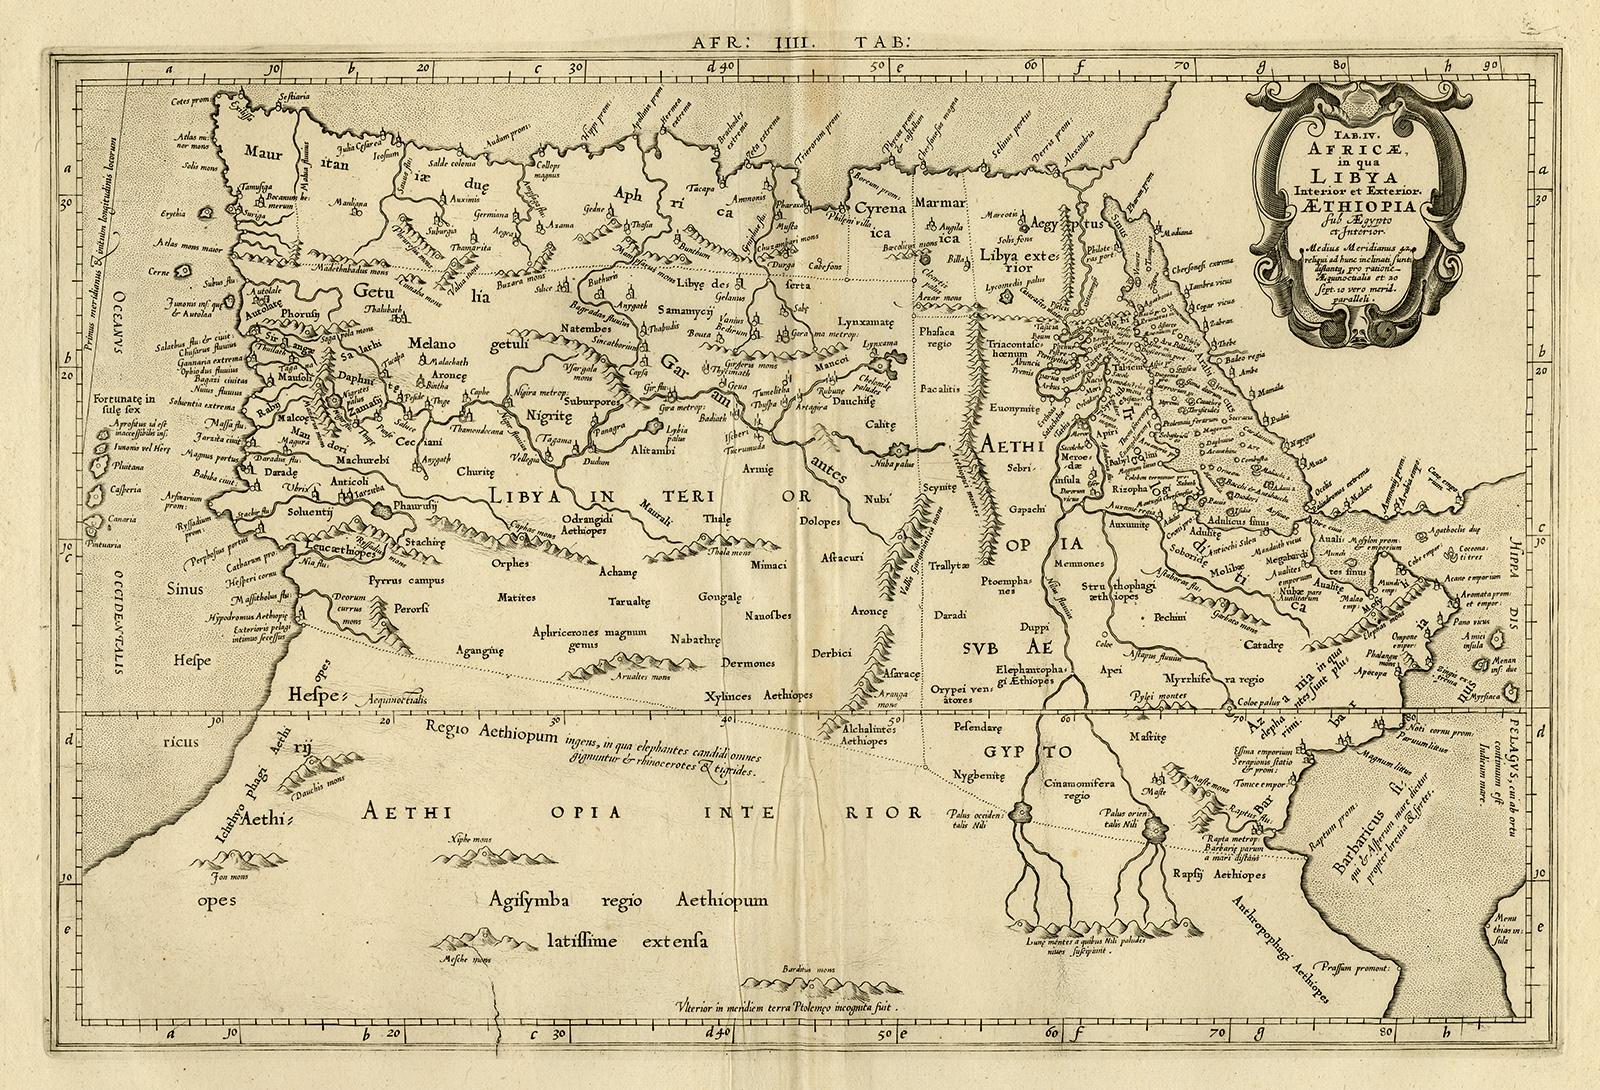 Gerard Mercator Print - Ptolemaic map of North Africa, Libya, Egypt by Mercator - Engraving - 17th c